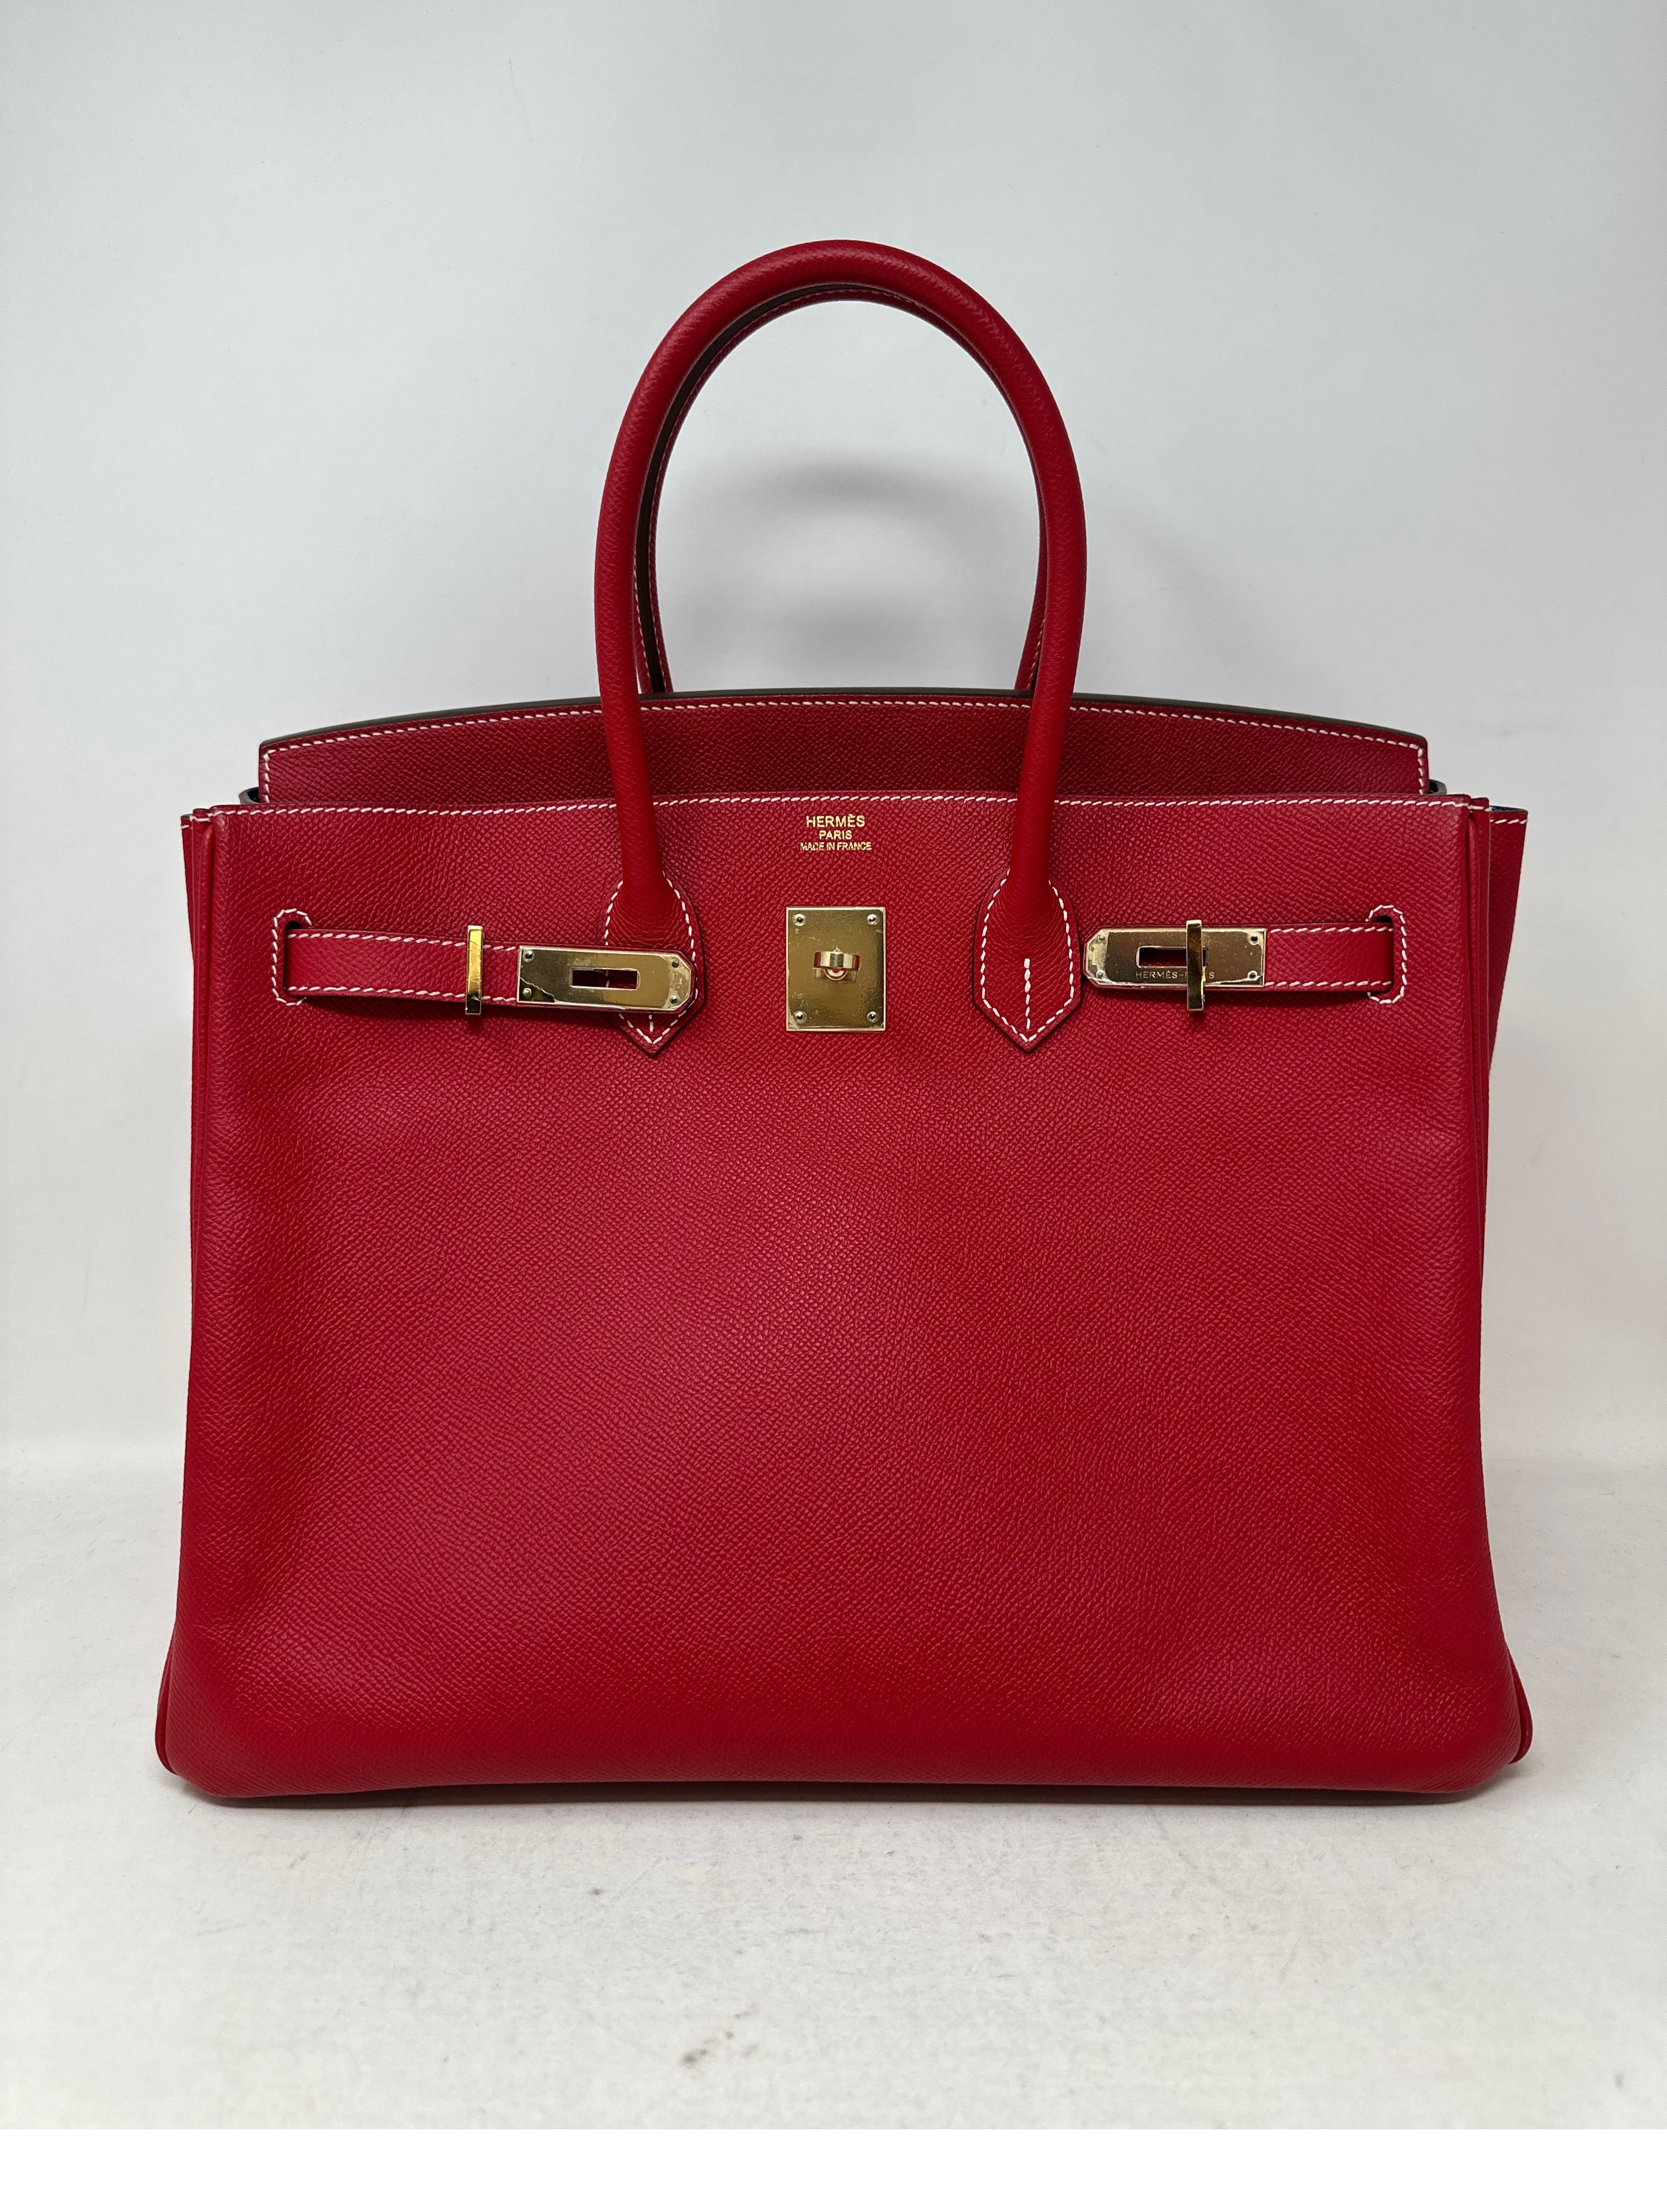 Hermes Rouge Casaque Candy Birkin 35 Bag. Red exterior and blue thalasa interior. Excellent condition. Plastic still on hardware. Gold hardware. Epsom leather. One of the most desired red colors made by Hermes. Includes clochette, lock, keys, and